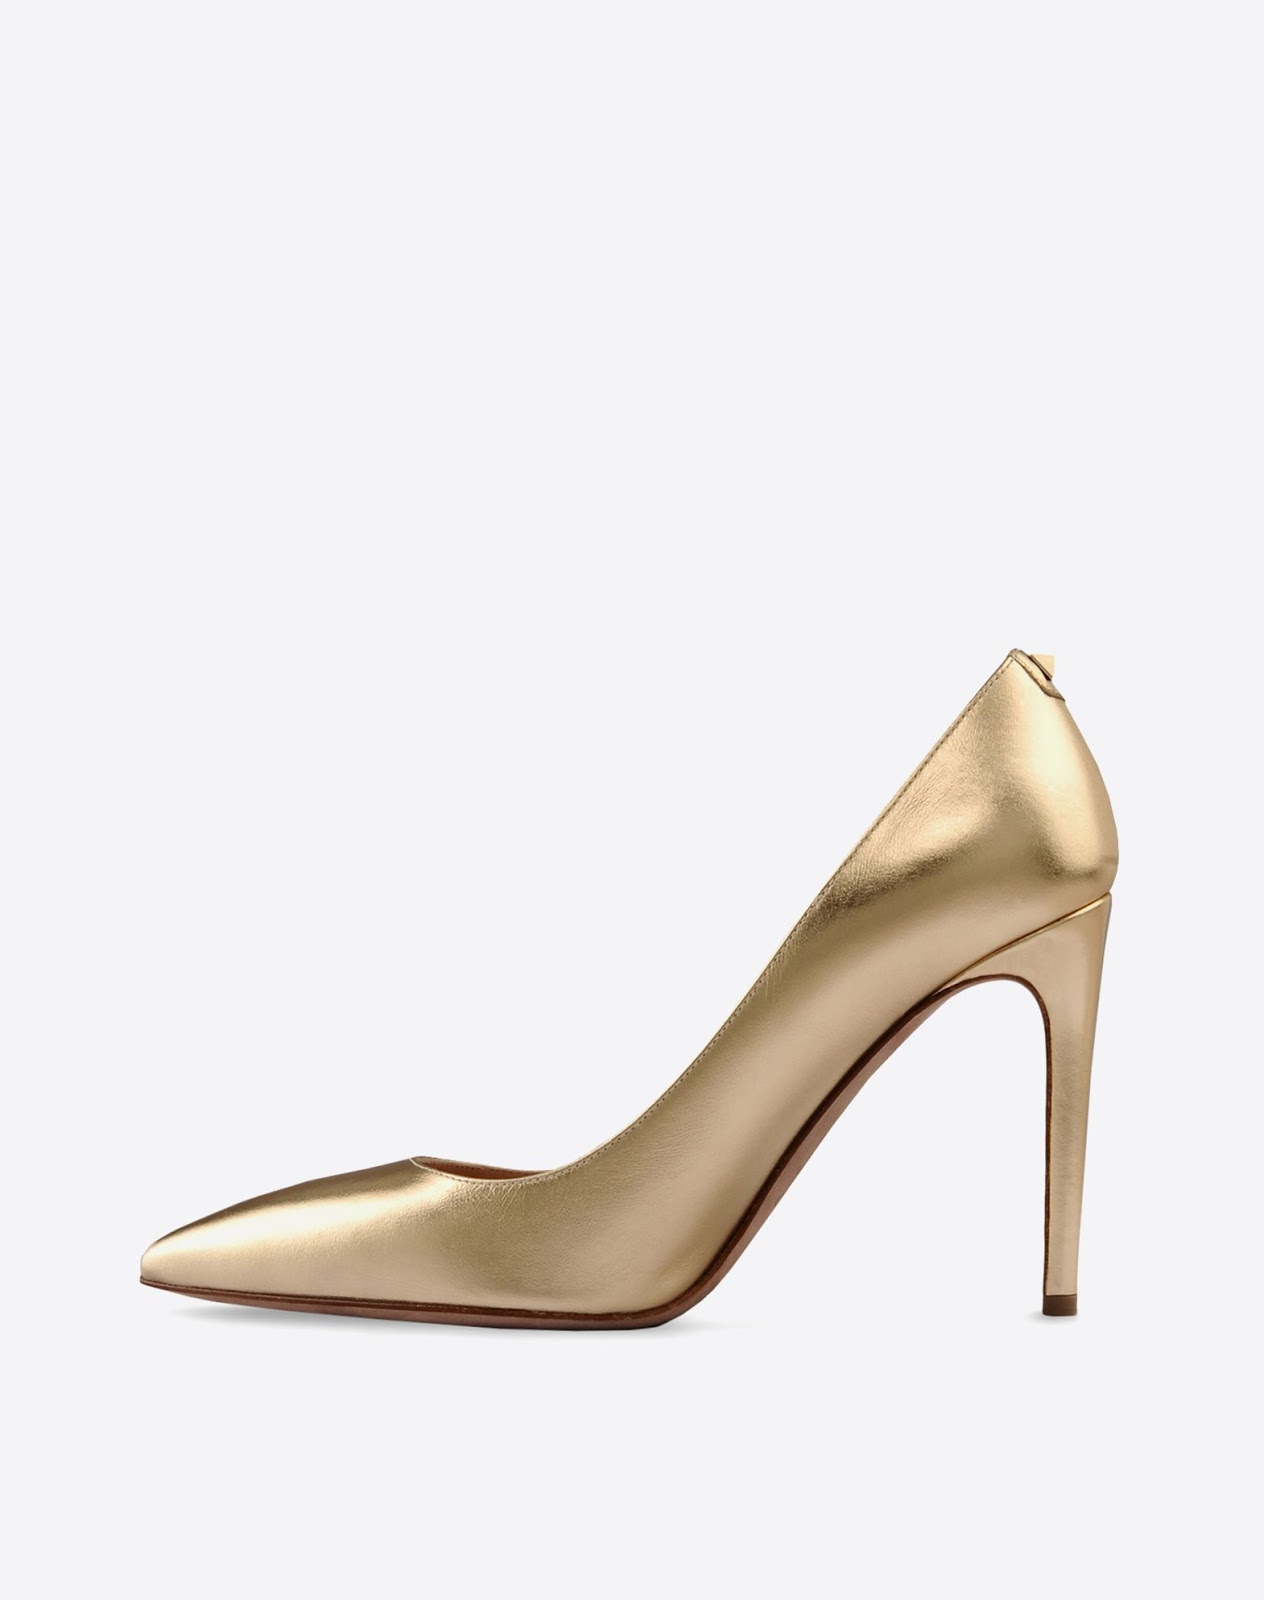 LadyLikes: That Slipper as Pure as Gold